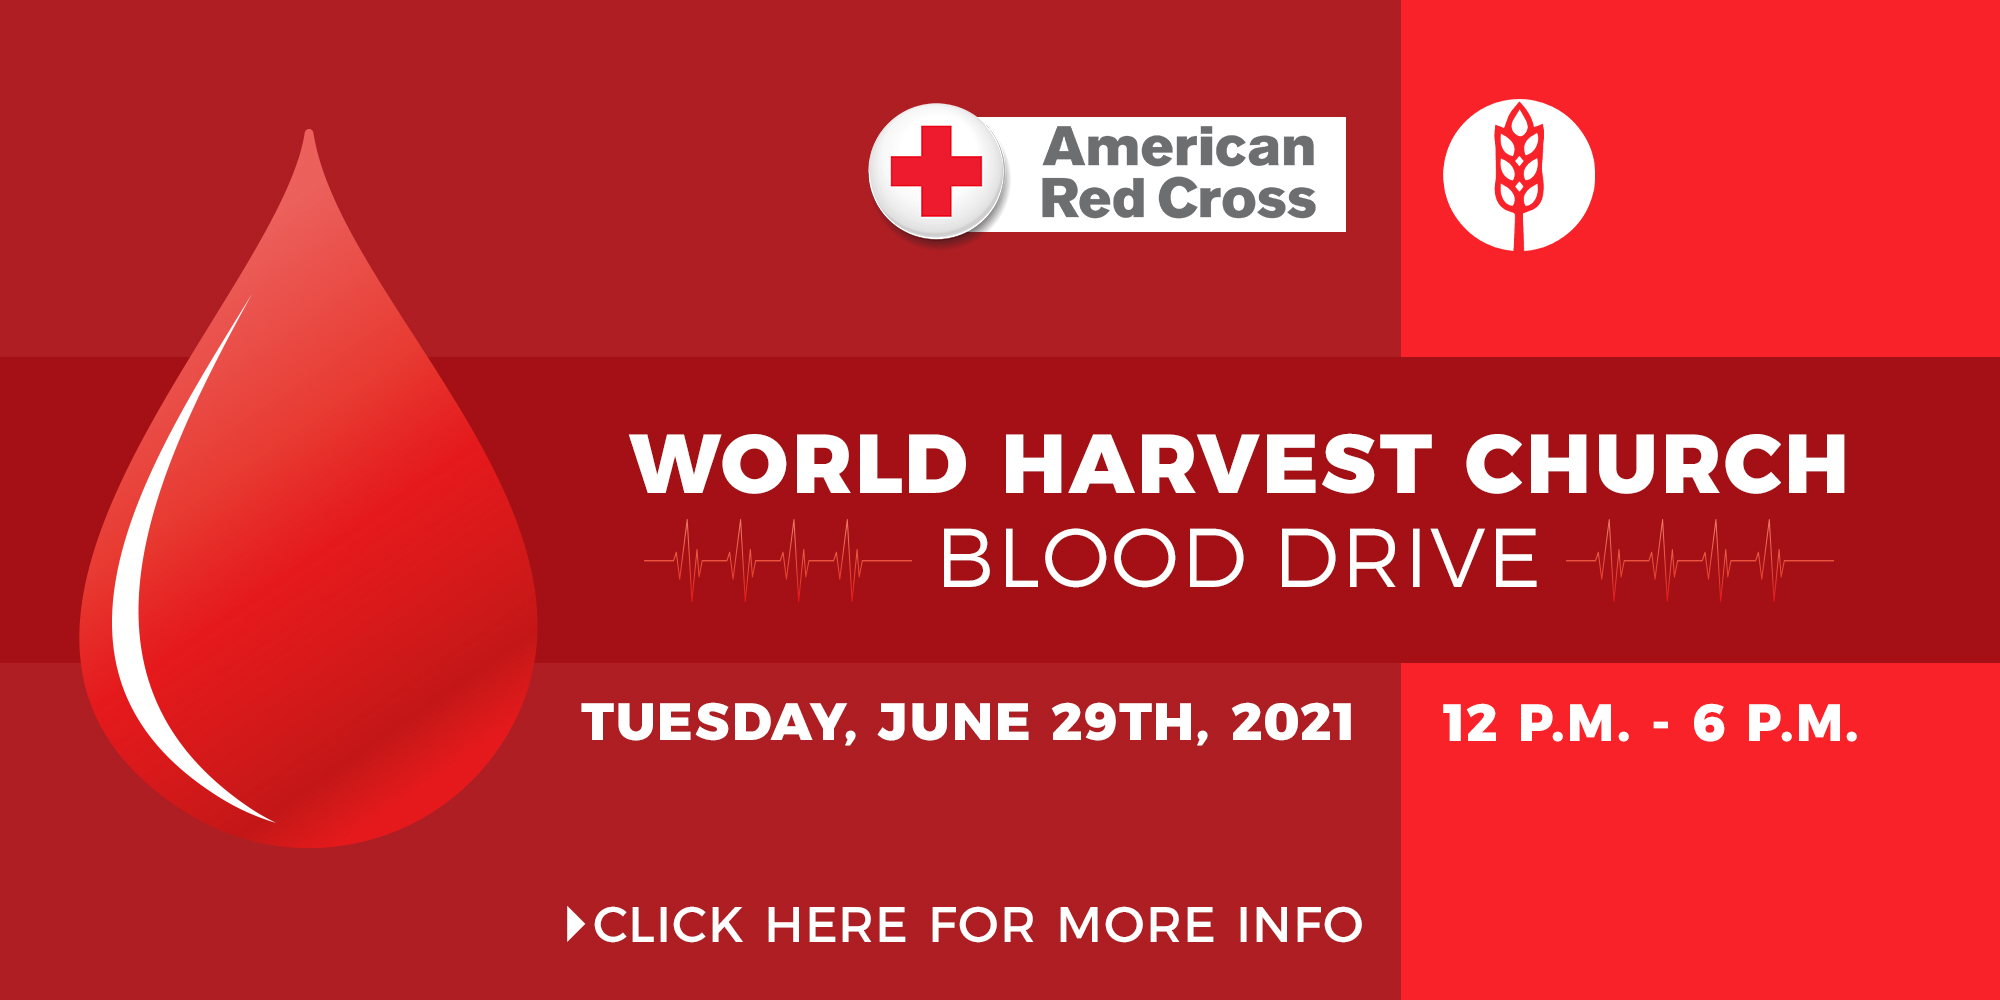 American Red Cross World Harvest Church Blood Drive Tuesday, June 29th, 2021 12 - 6PM Click Here For More Info